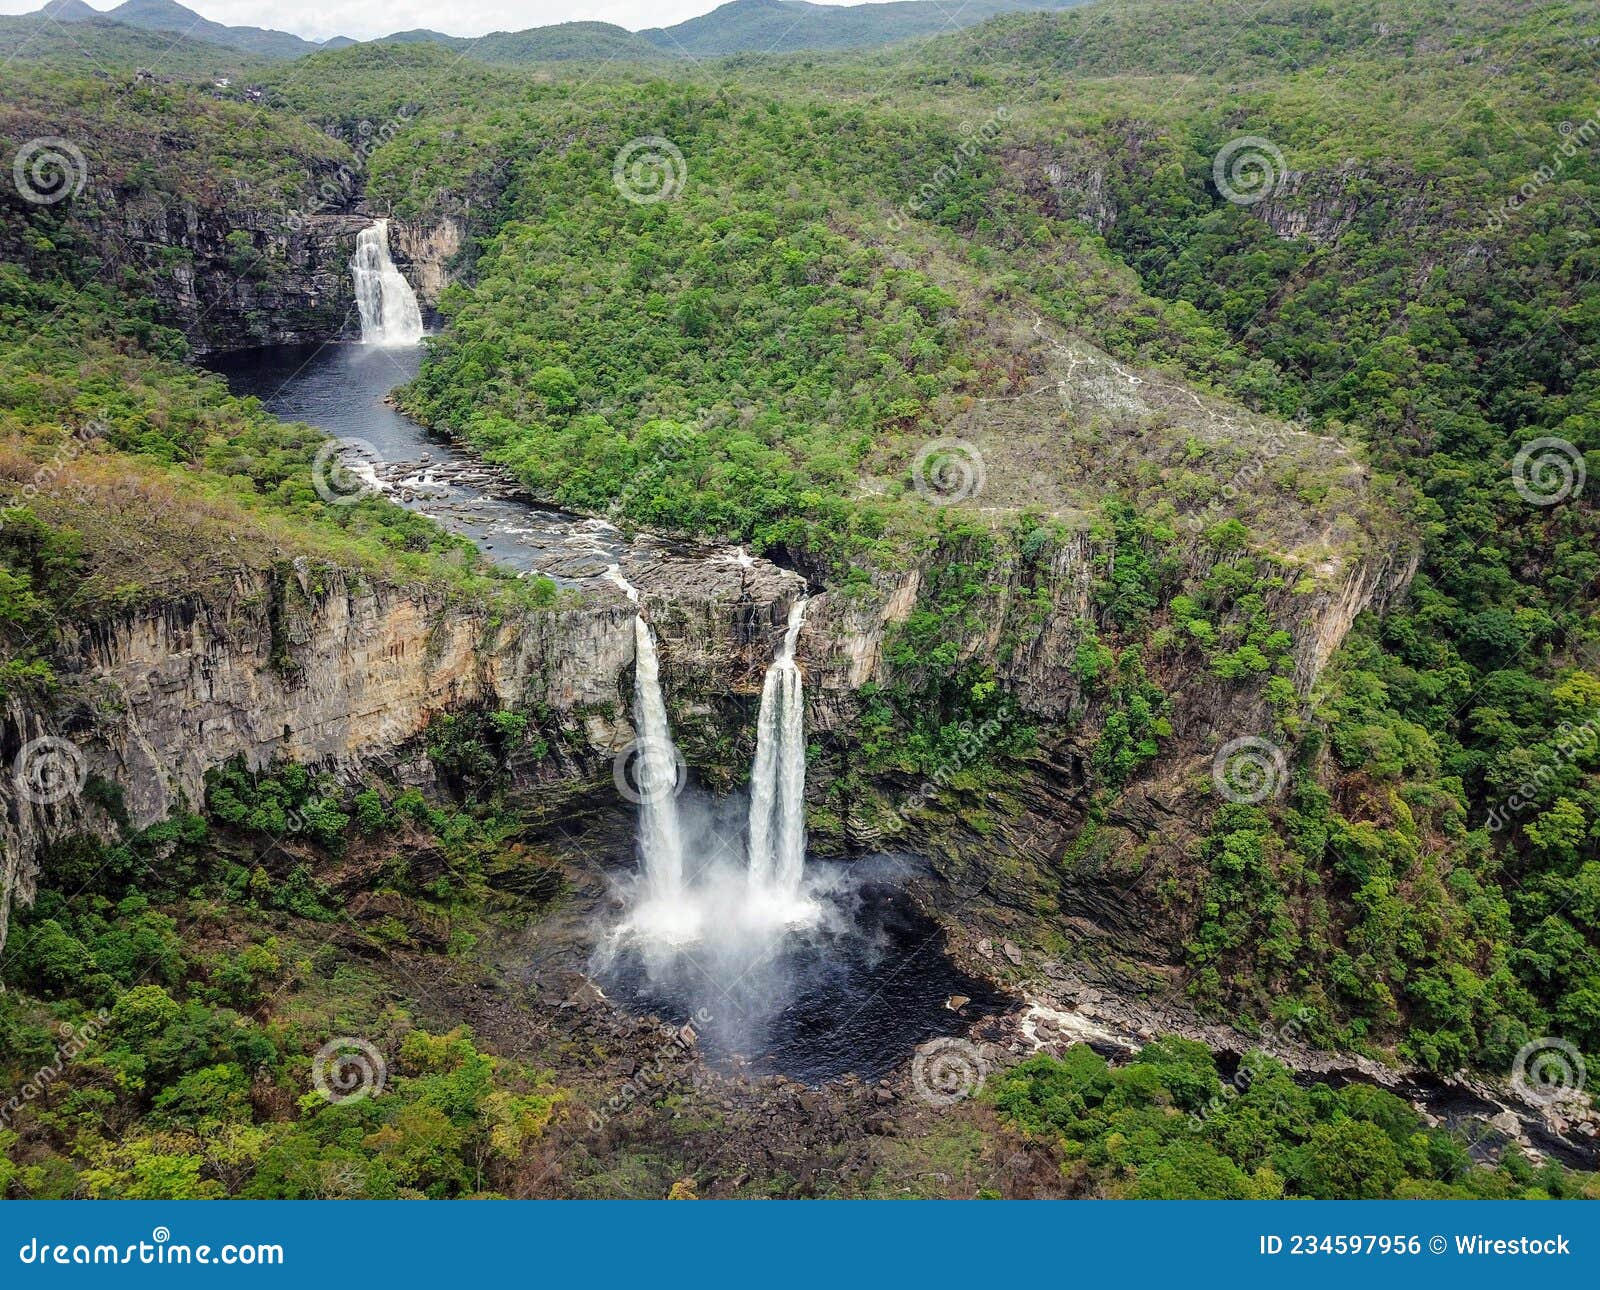 aerial view of waterfalls in chapada dos veadeiros national park in the state of goias, brazil